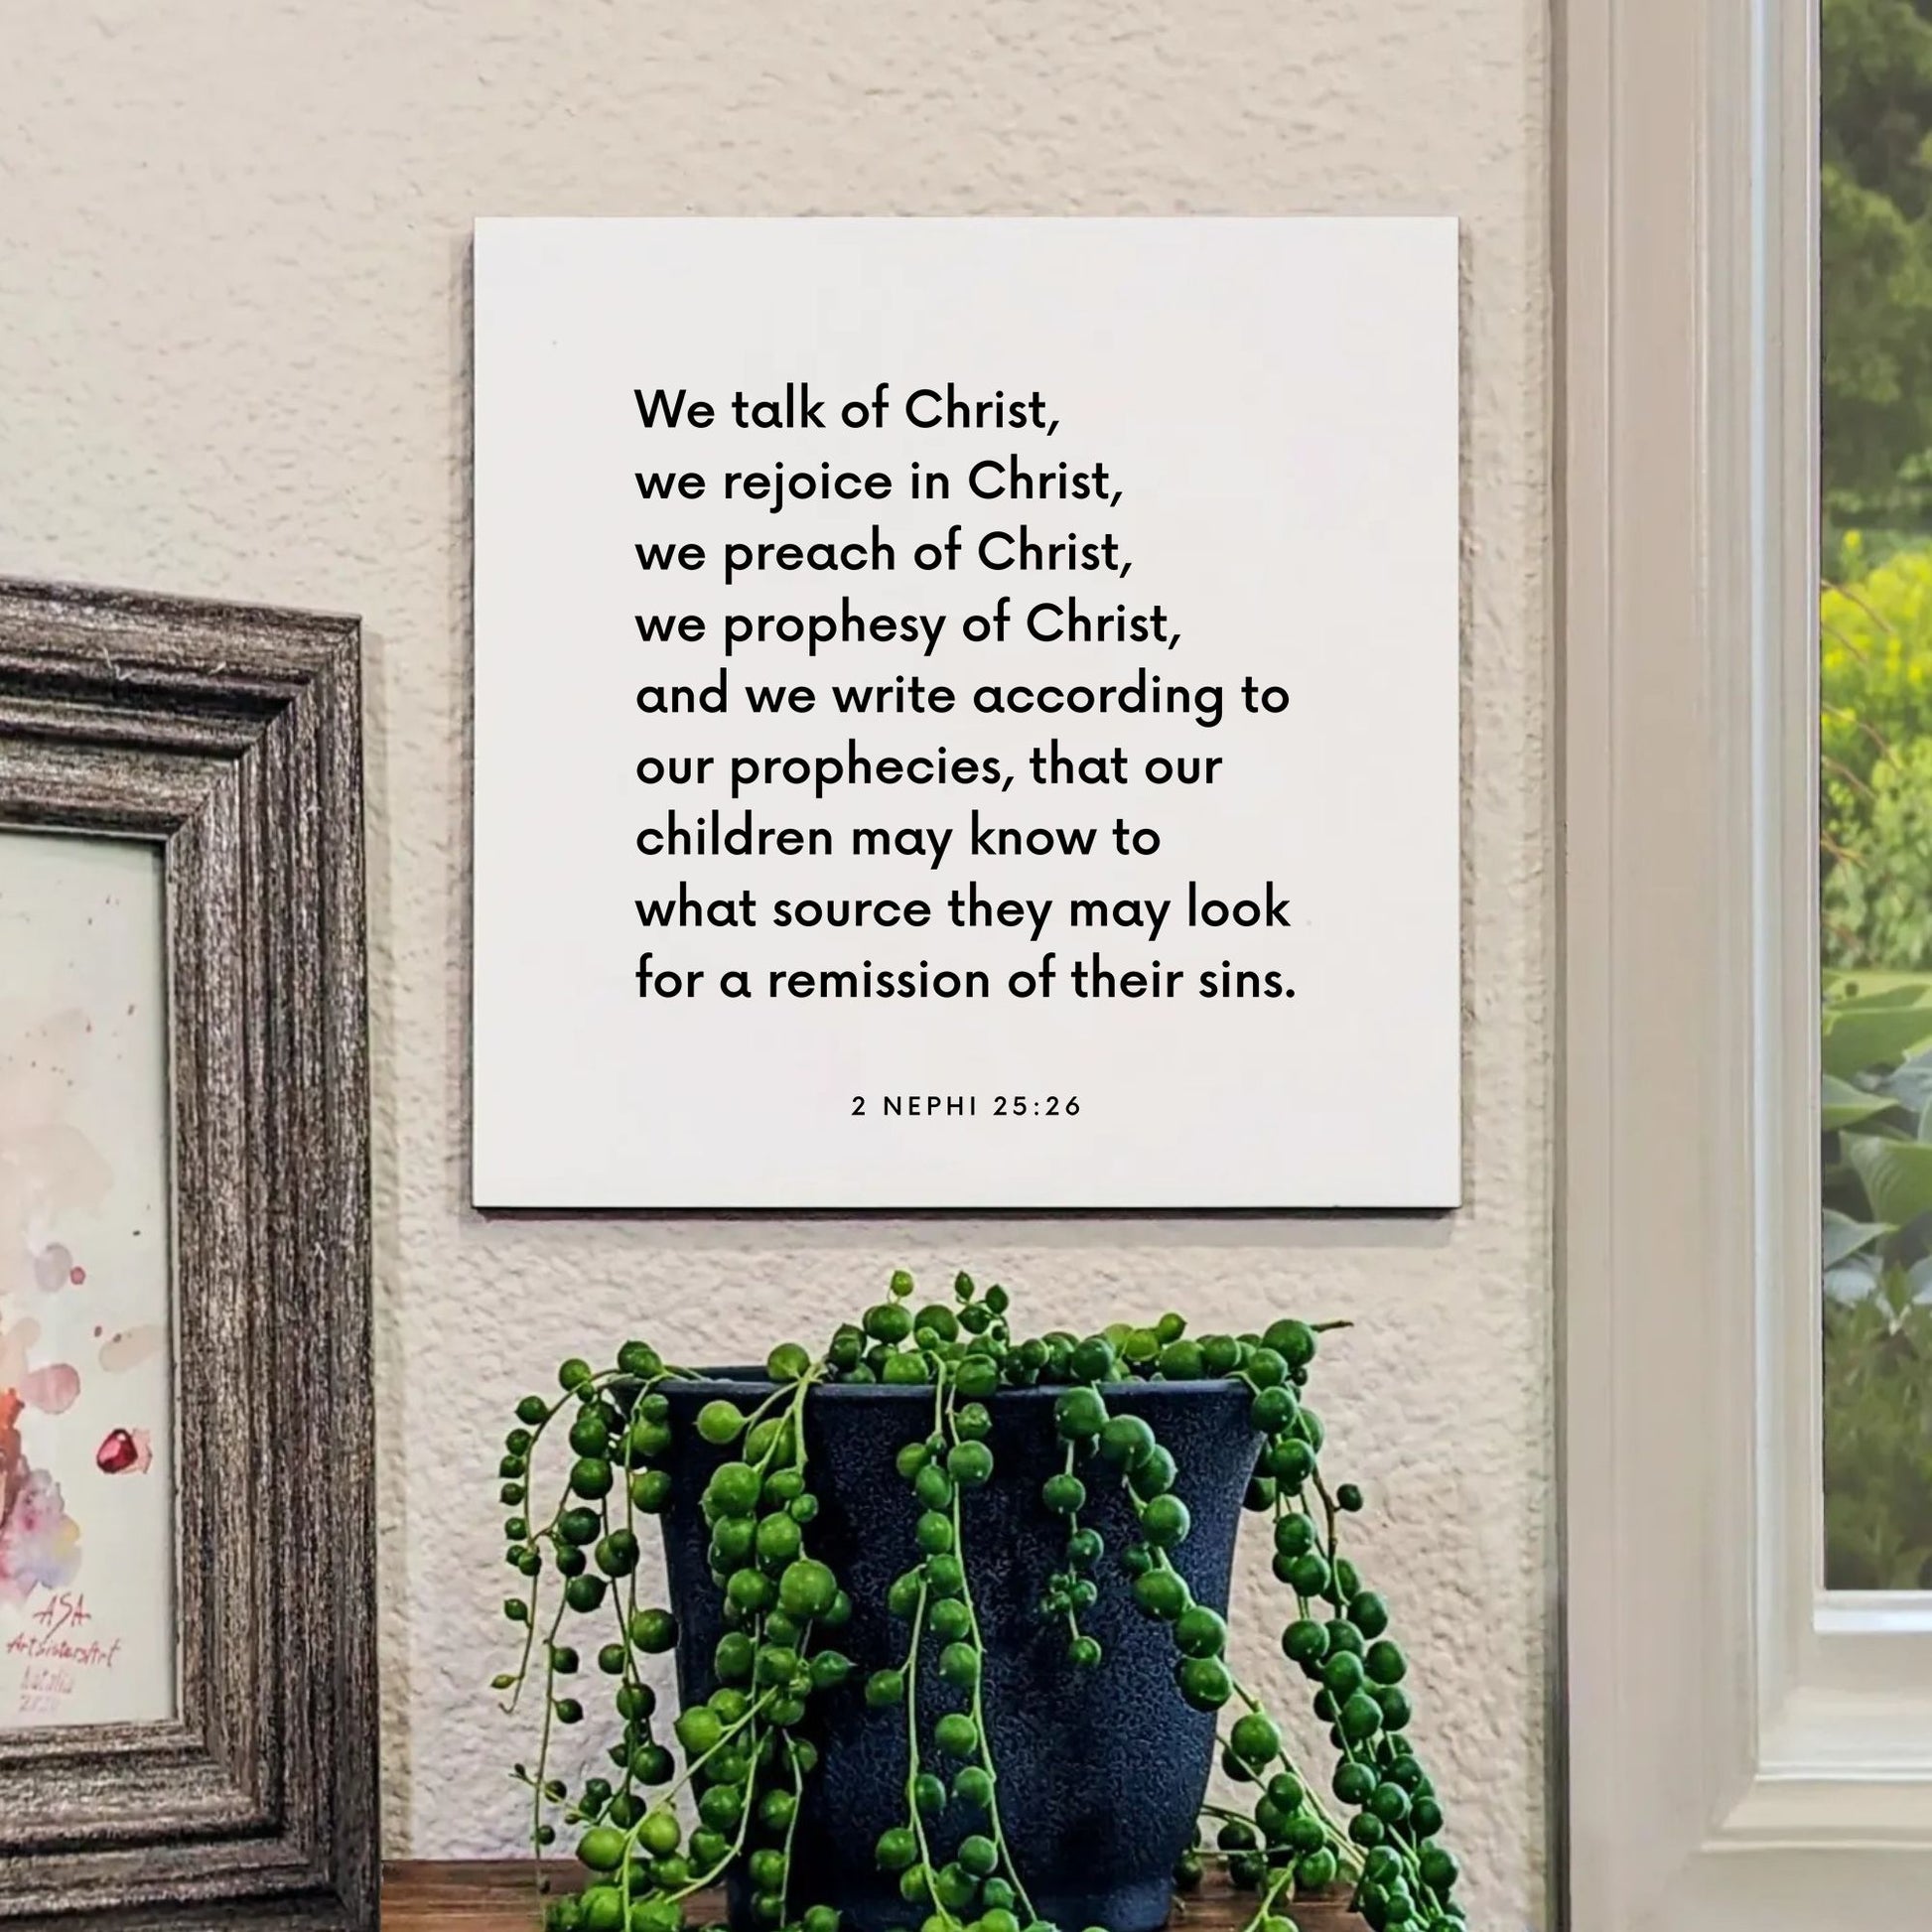 Window mouting of the scripture tile for 2 Nephi 25:26 - "We talk of Christ, we rejoice in Christ"